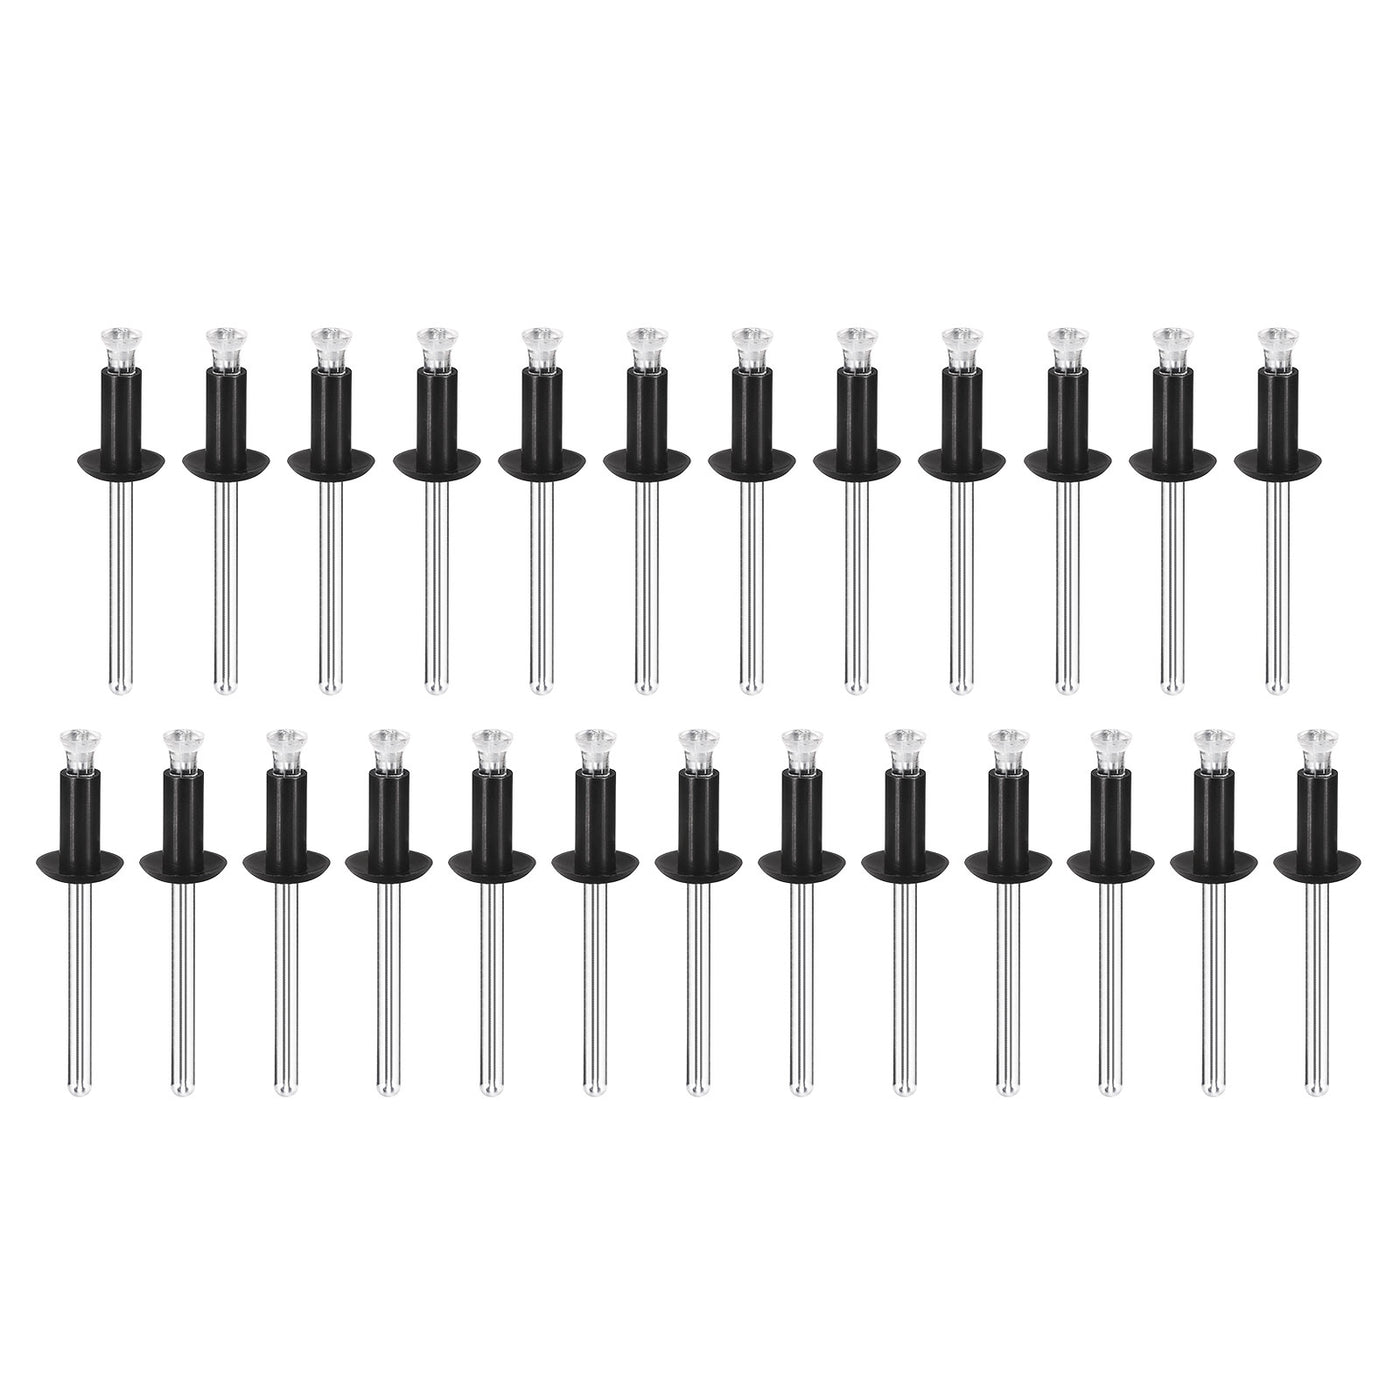 uxcell Uxcell 5.6mm x 12.7mm Nylon Blind Rivets for PC Board Bumper Trim Retainer, Black 50Pcs